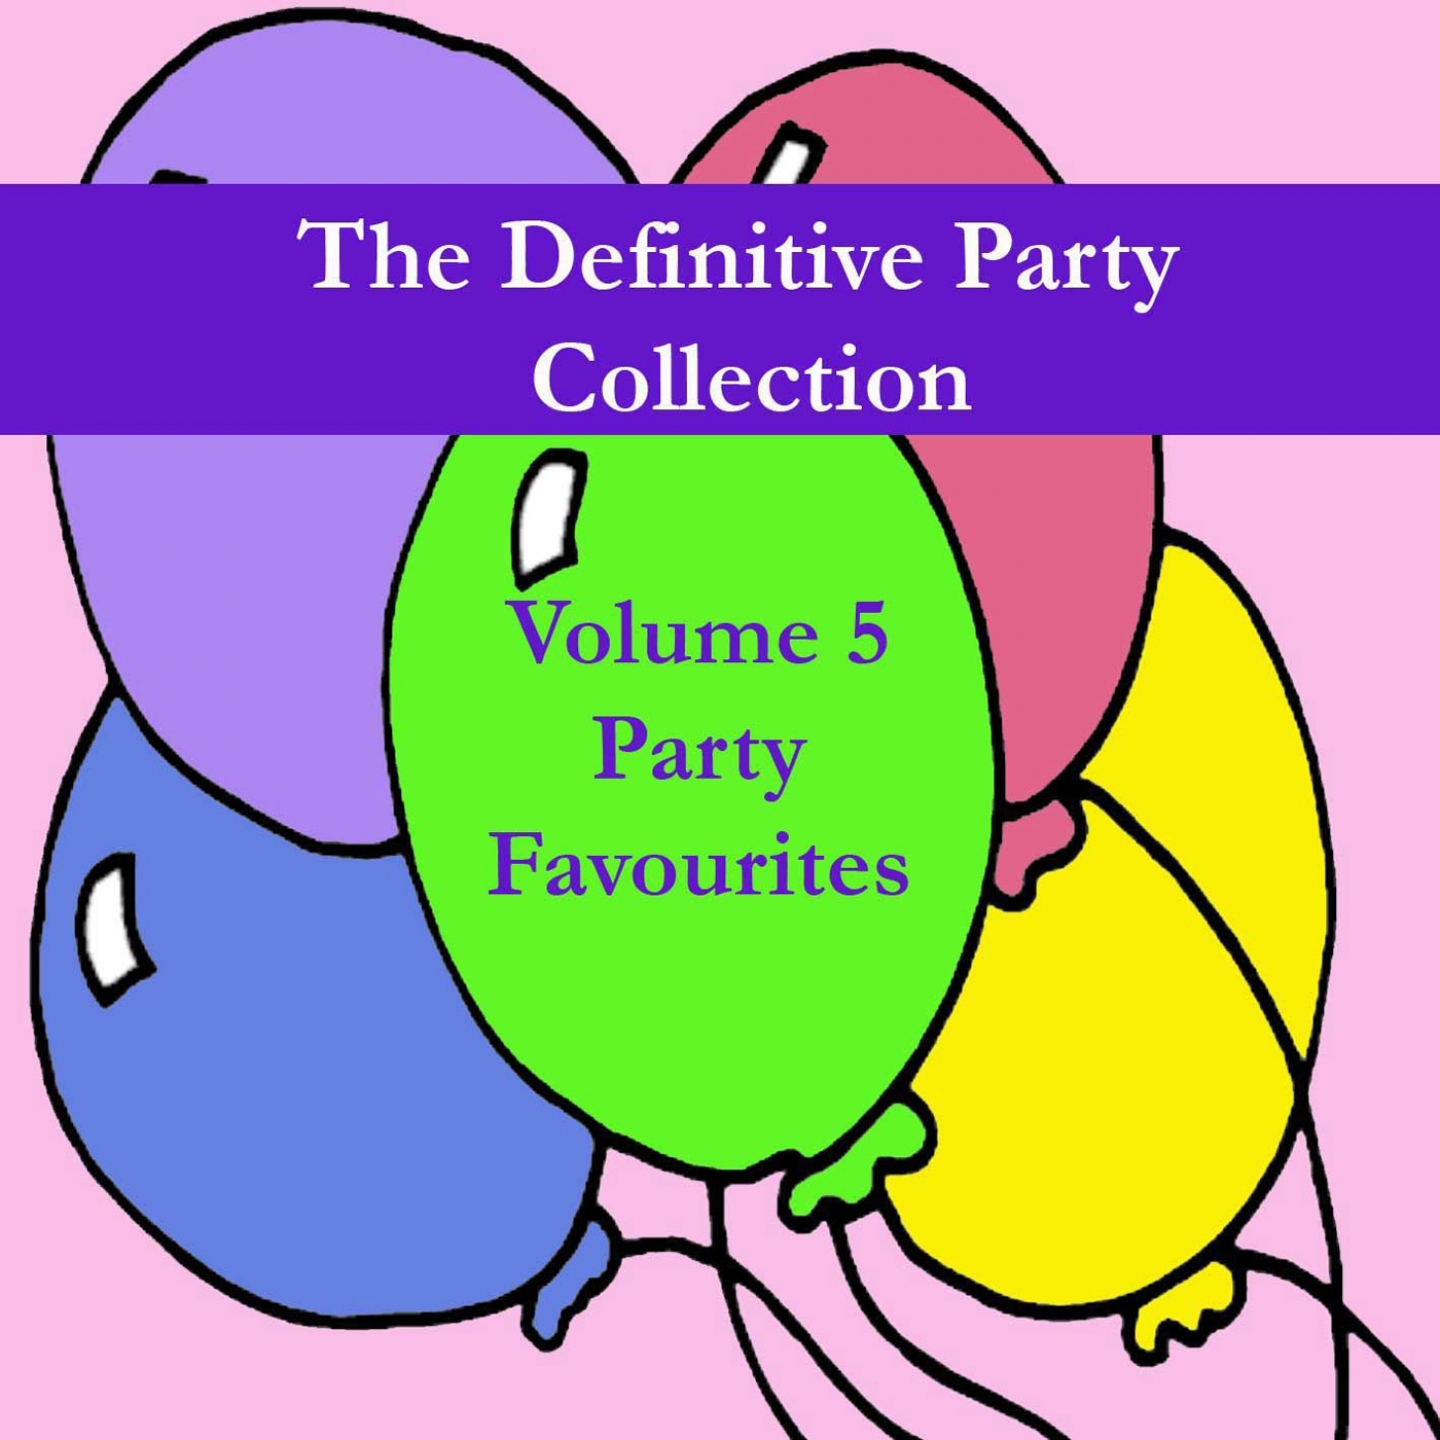 The Definitive Party Collection, Vol. 5 - Party Favourites